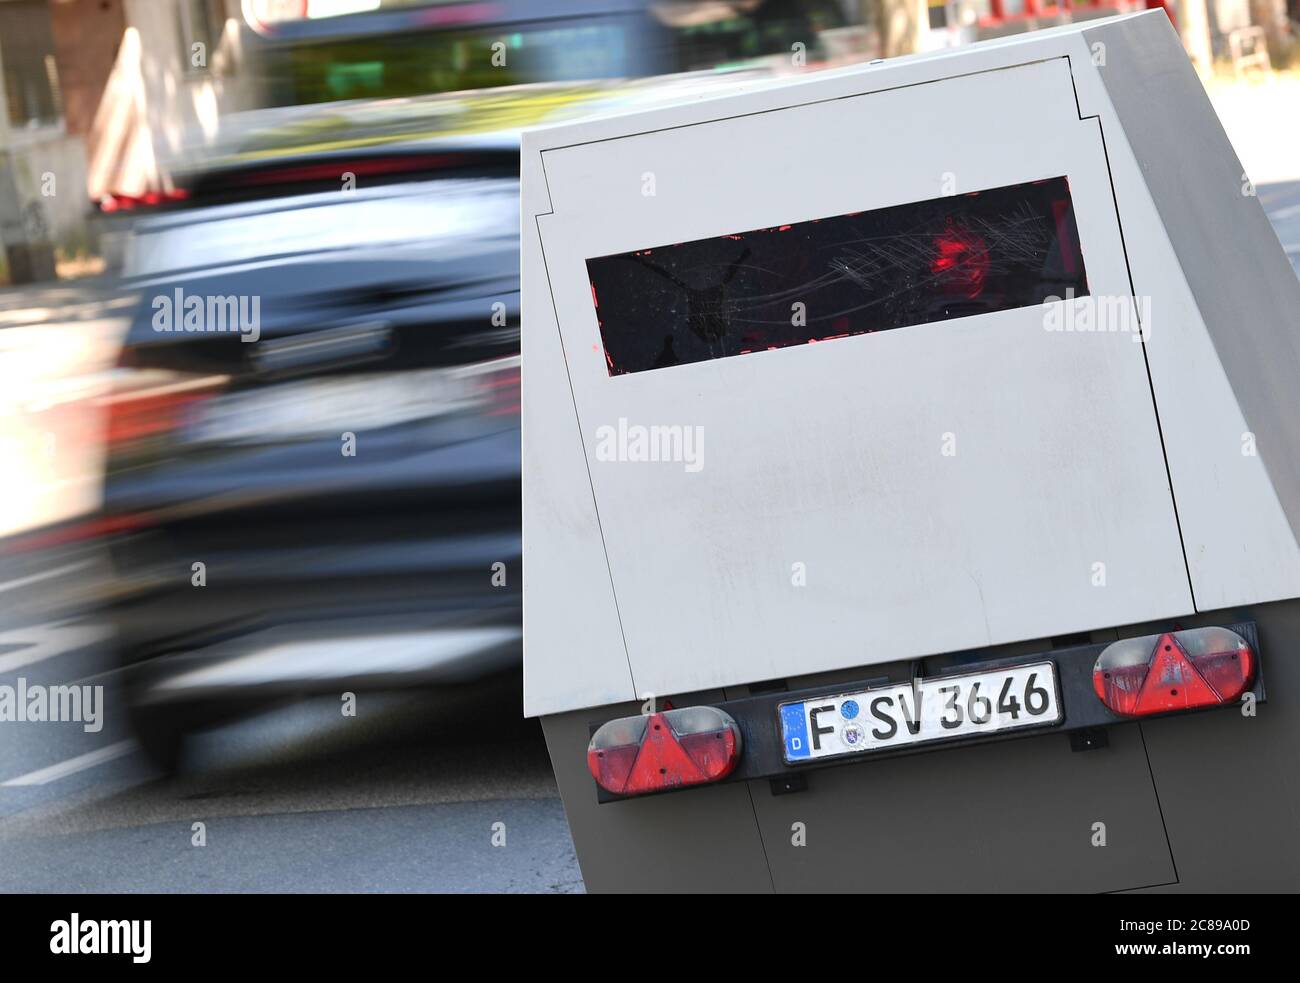 22 July 2020, Hessen, Frankfurt/Main: A so-called enforcement trailer of  the Frankfurt Road Traffic Office for speed monitoring is located on the  edge of Hanauer Landstraße in the east of Frankfurt. The